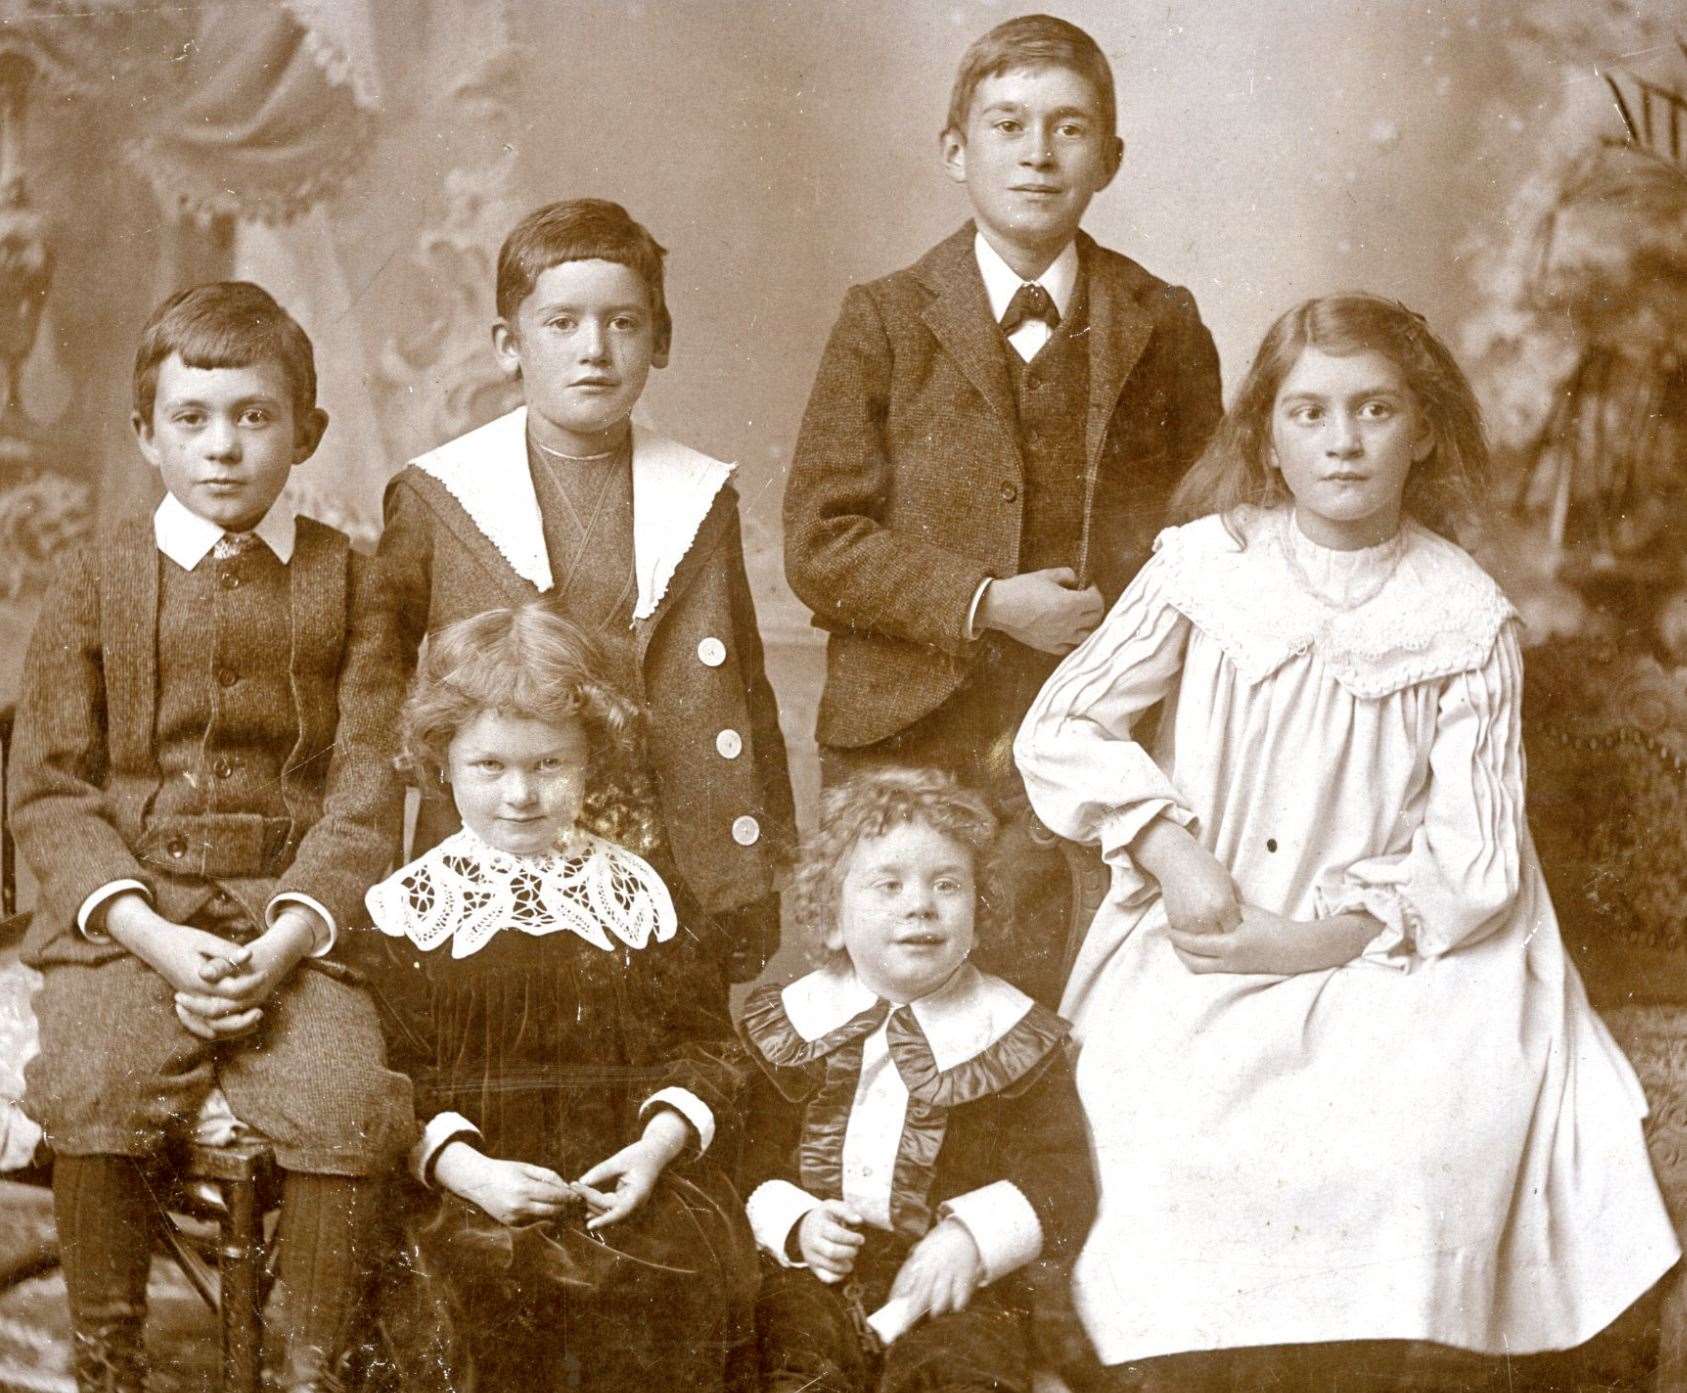 The Coghill family in their Sunday best, as seen in one of the photo books for sale.